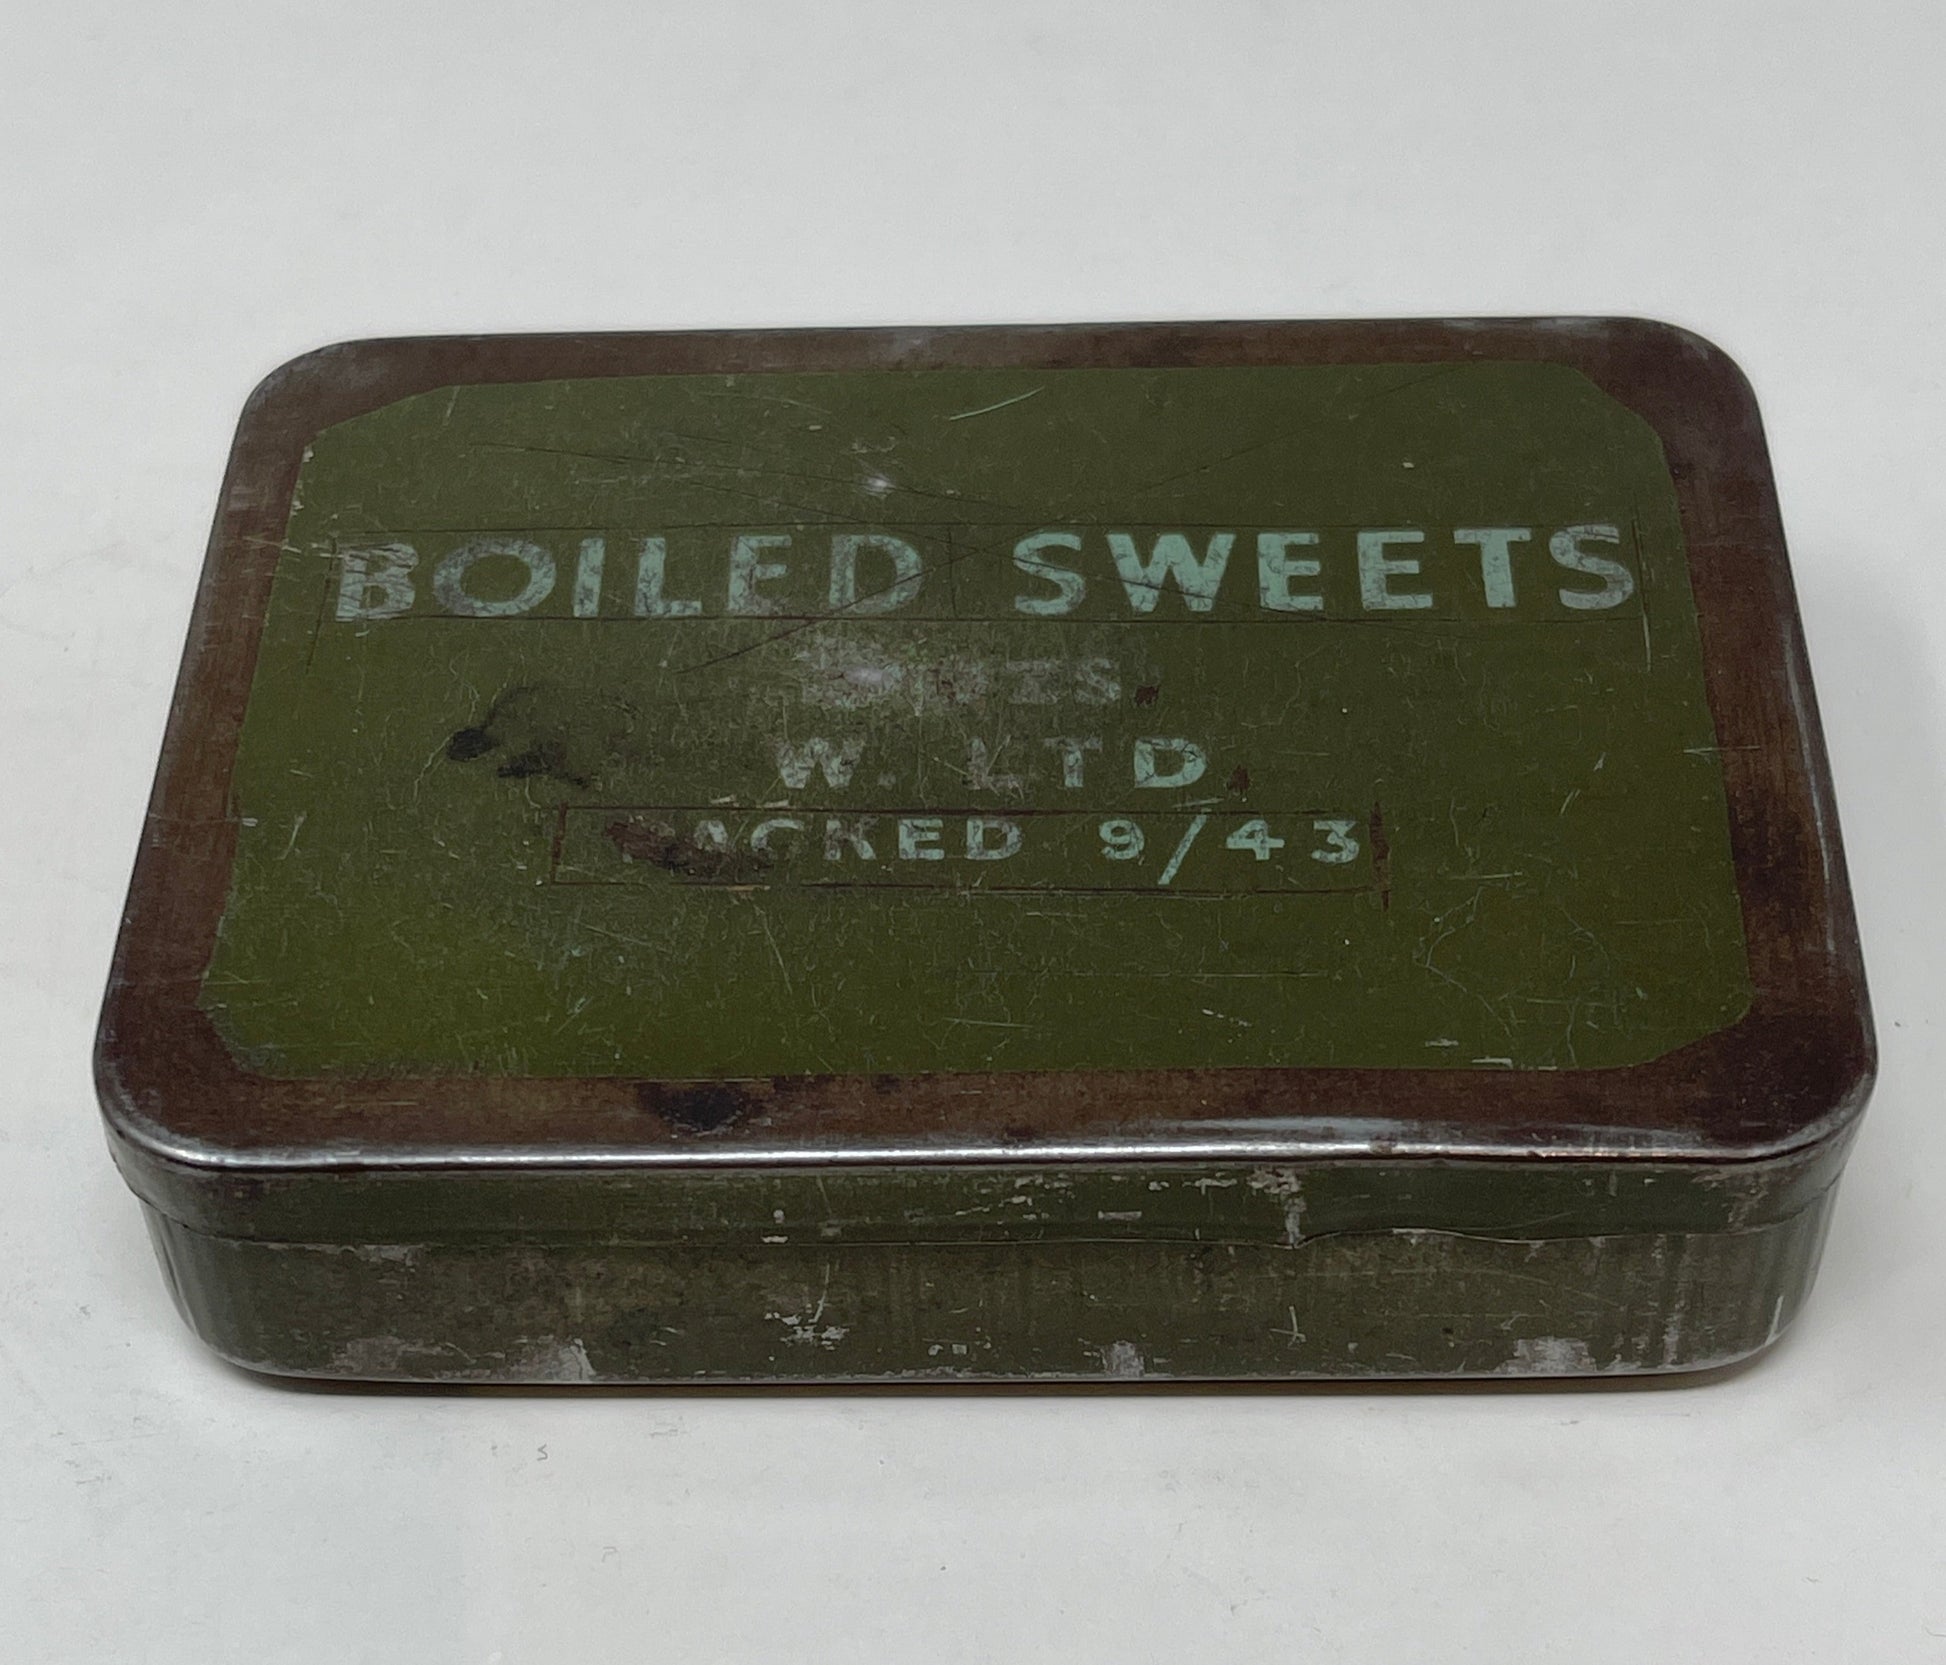 British Army Boiled Sweet Tin Packed 9/43